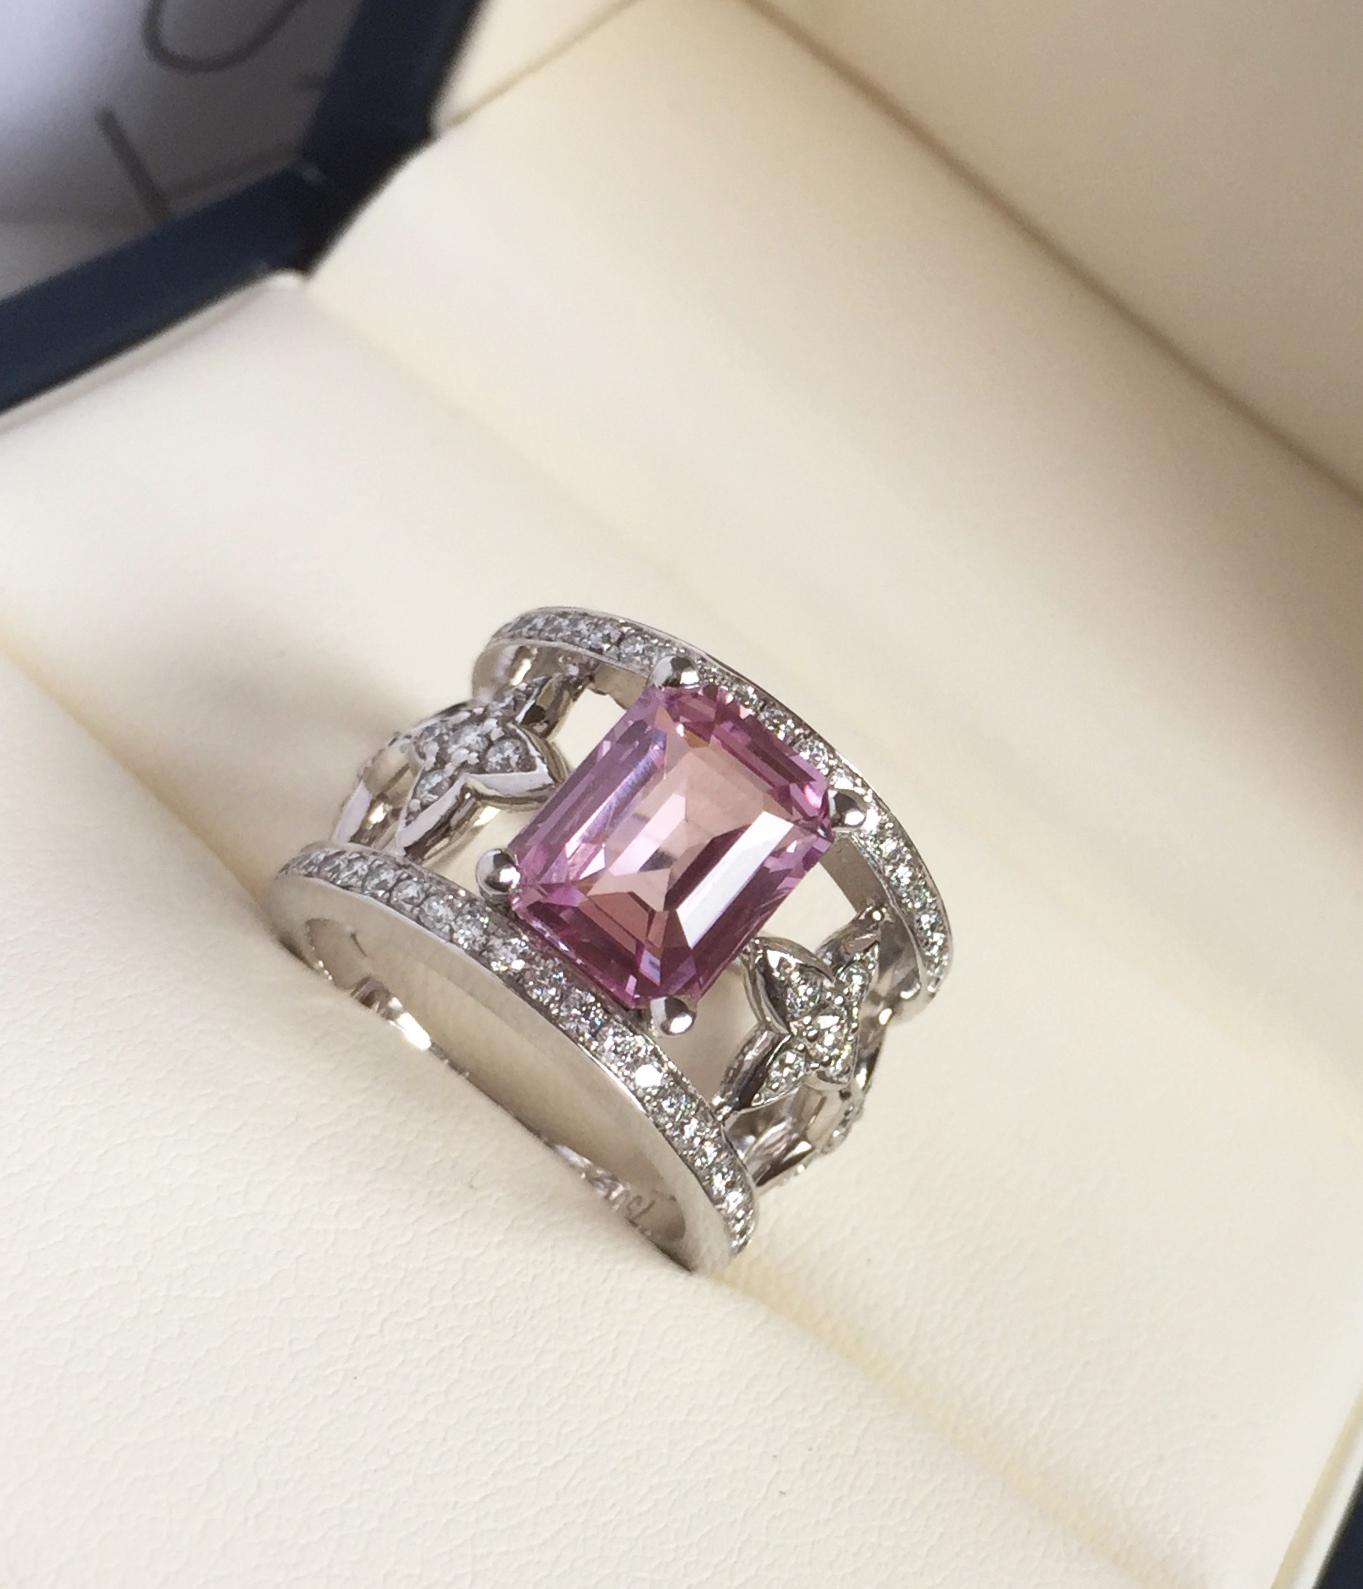 JdJ Couture Emerald Cut Pink Sapphire and Diamond Ring in 18 Karat White Gold 3